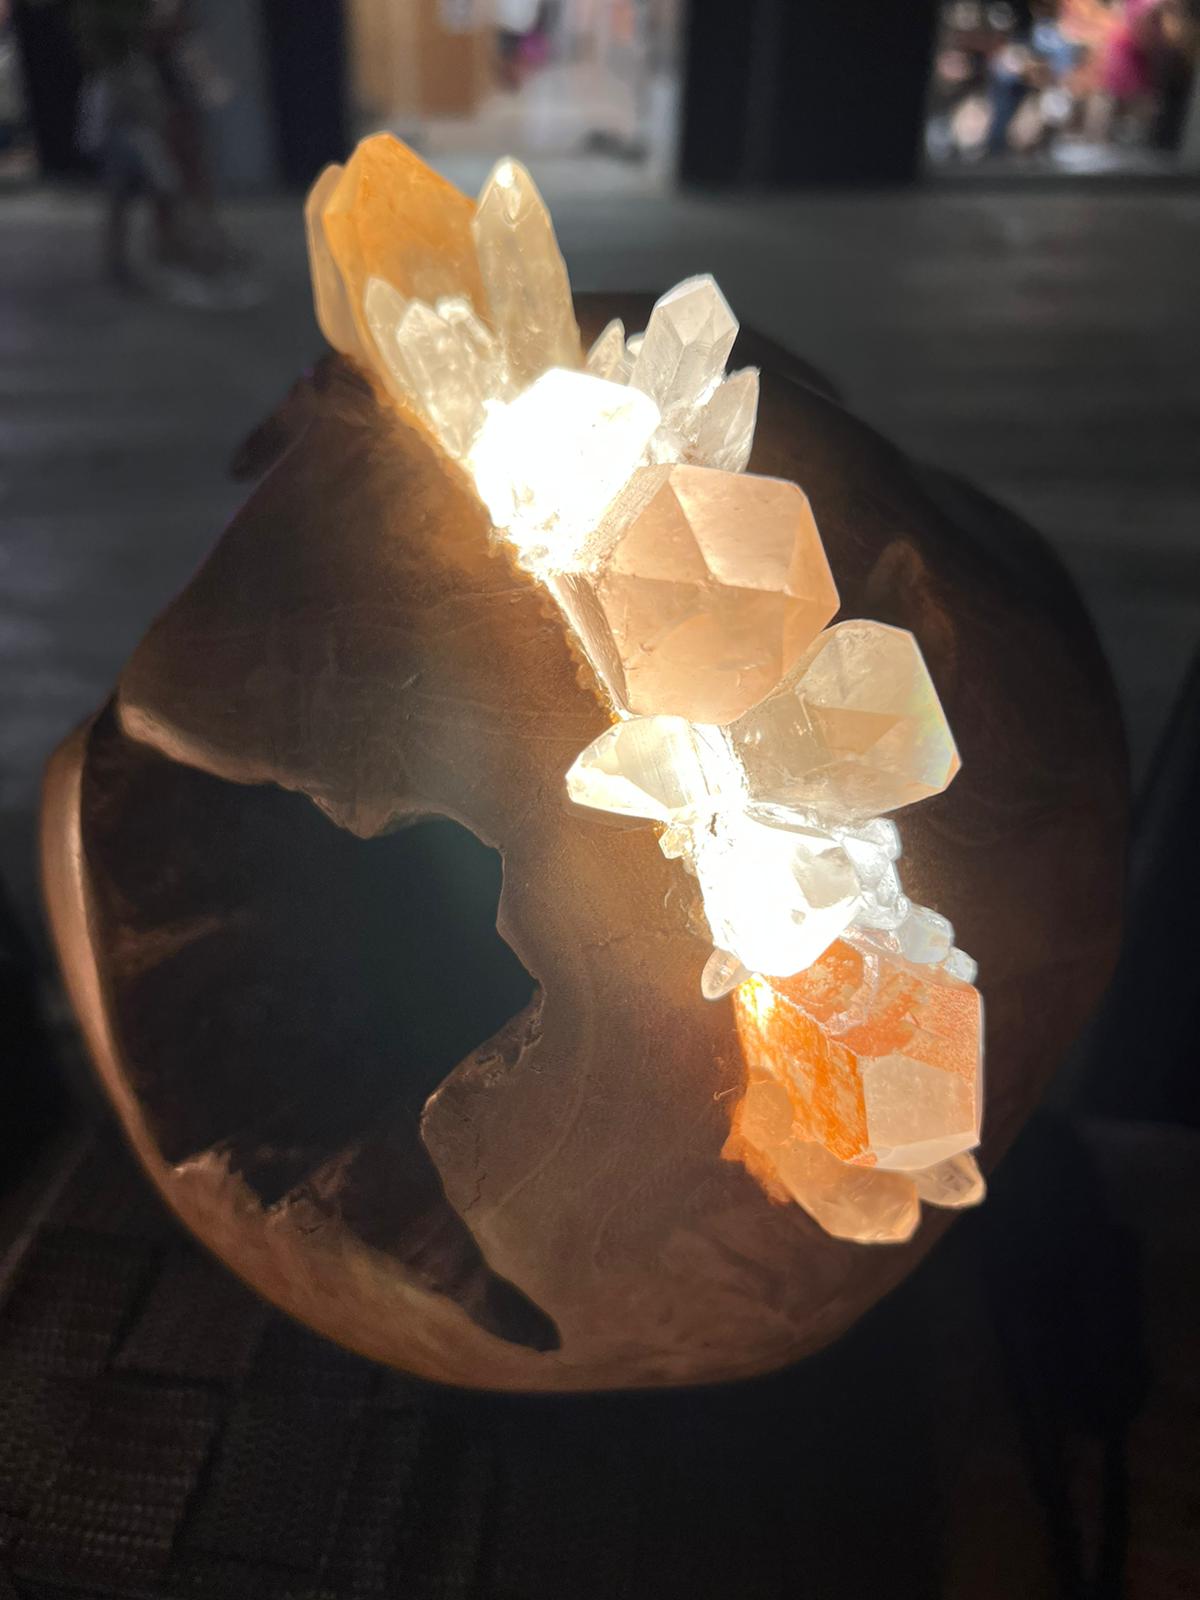 Energy Ball Shaped Lamp Made Of Teca Wood, Inlaid With Mineral Crystals.